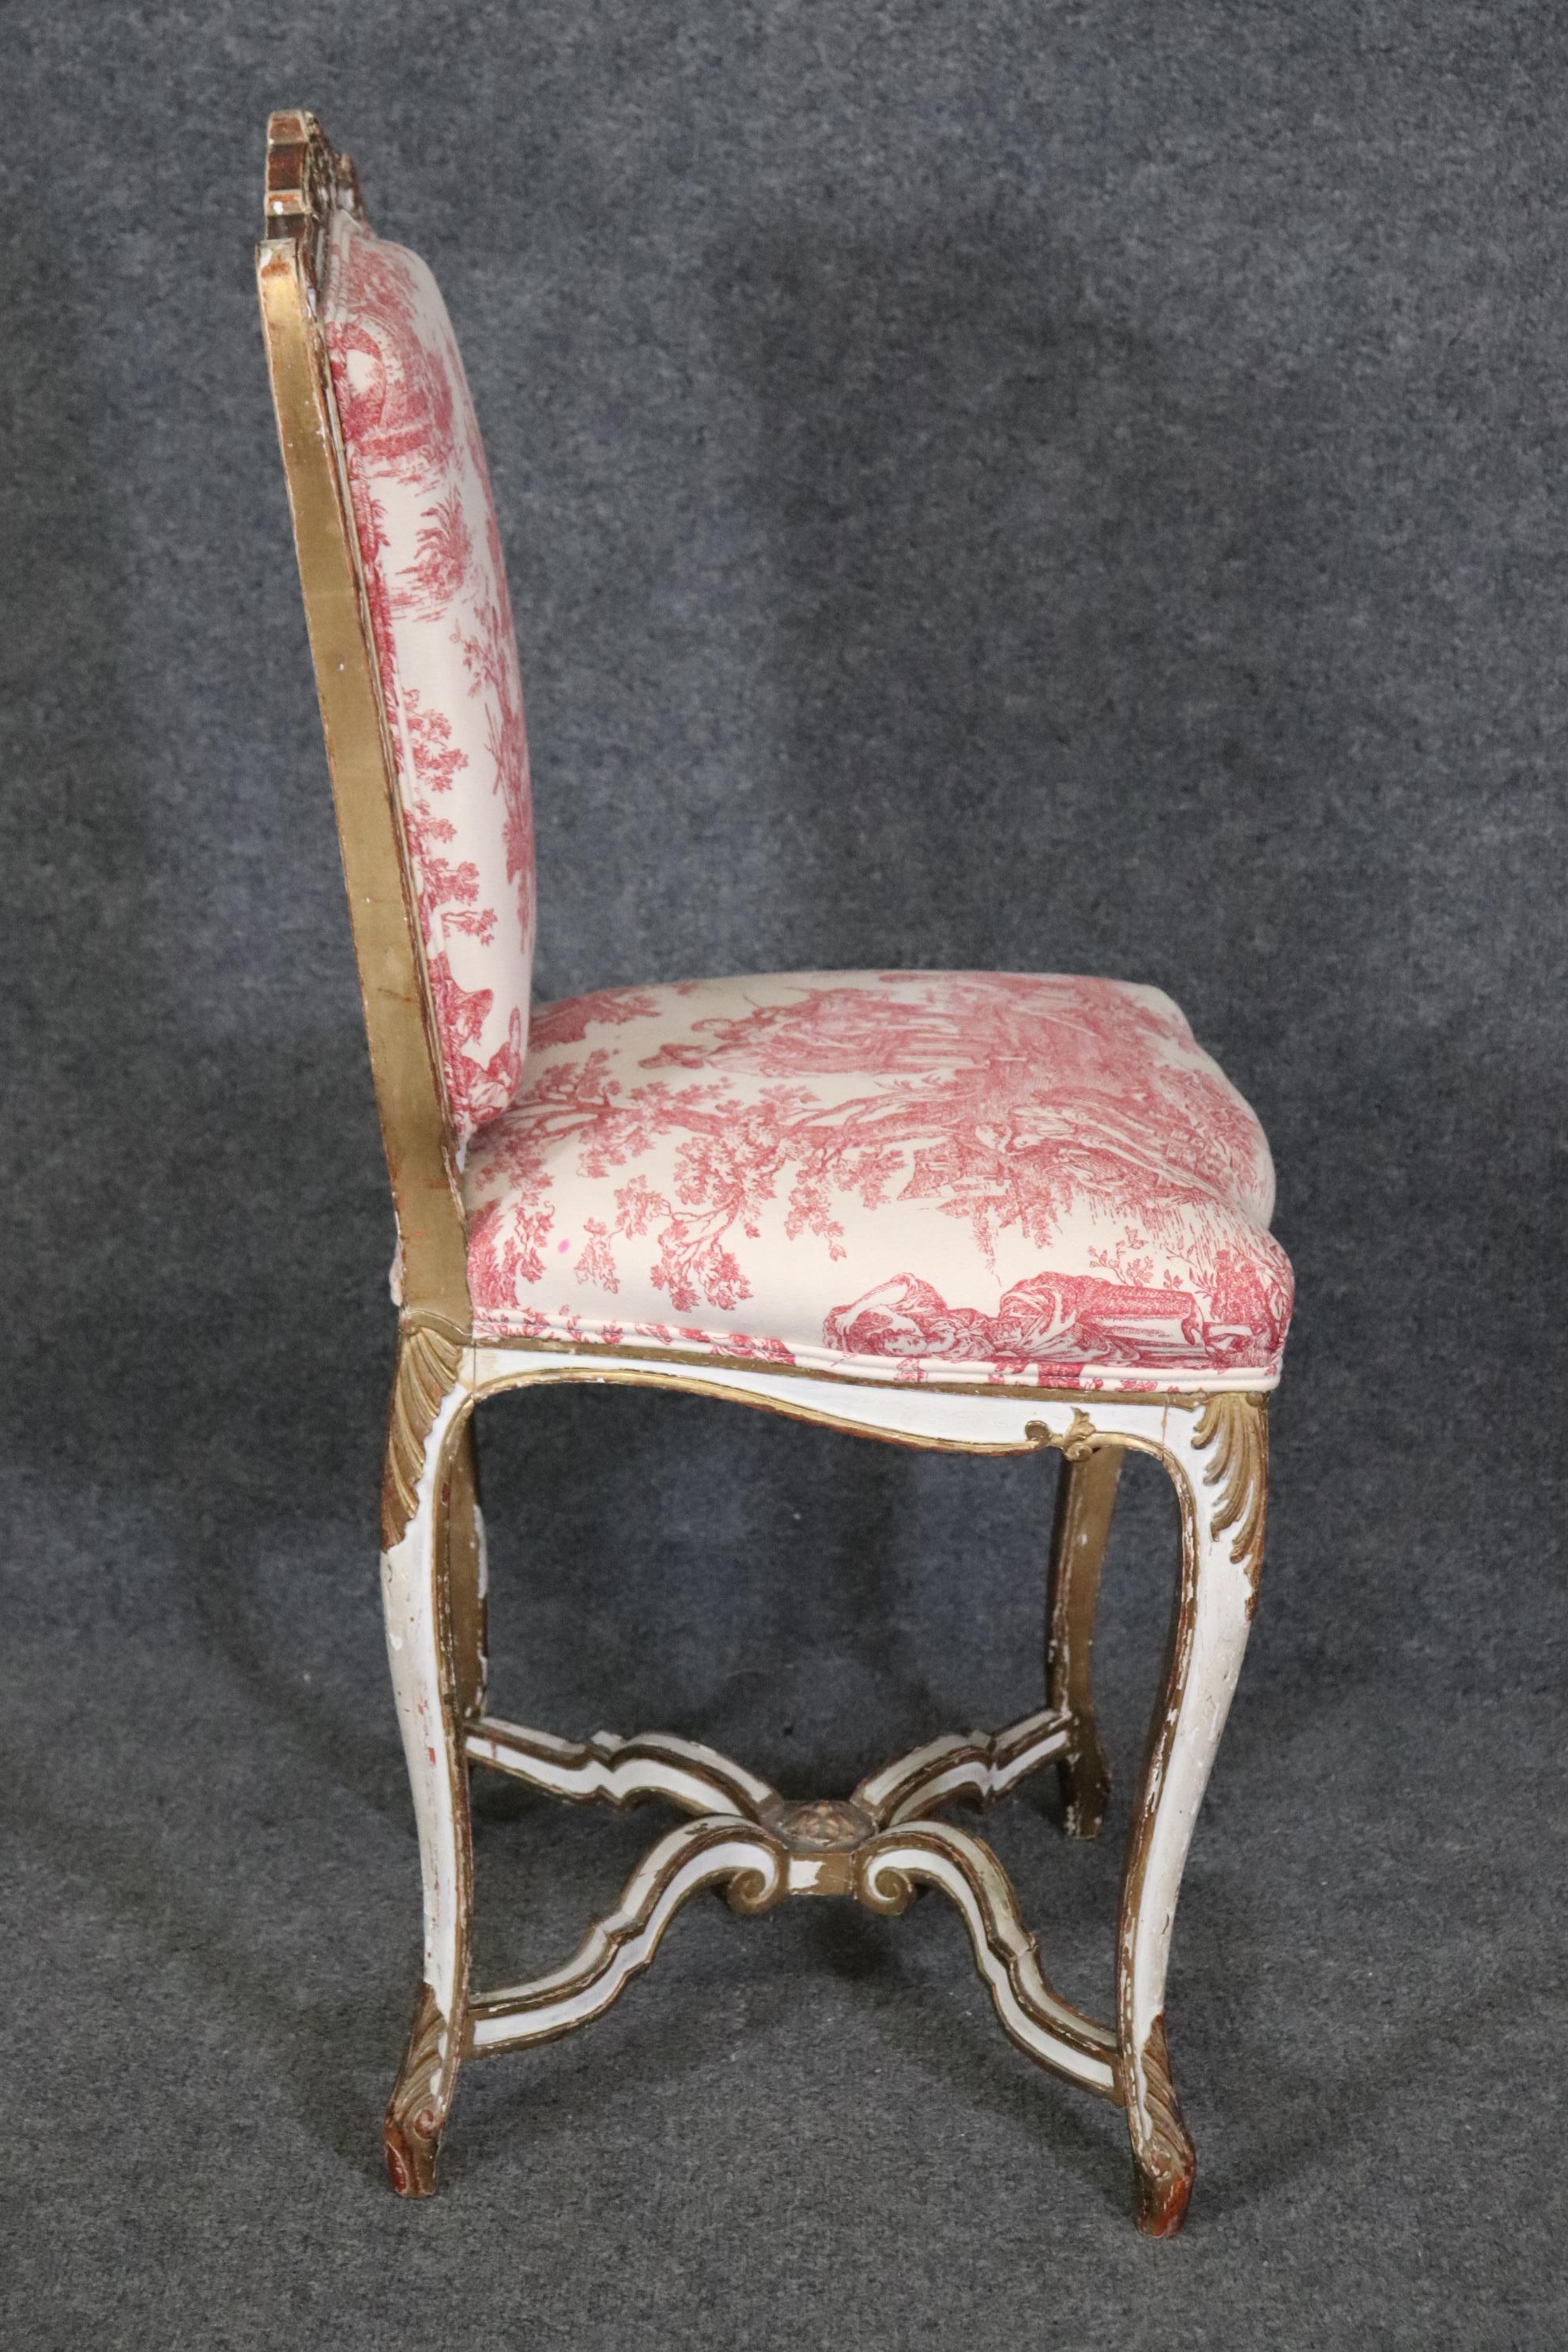 Upholstery Antique Louis XV Rococo Style French Paint Decorated & Gilt Desk Chair For Sale